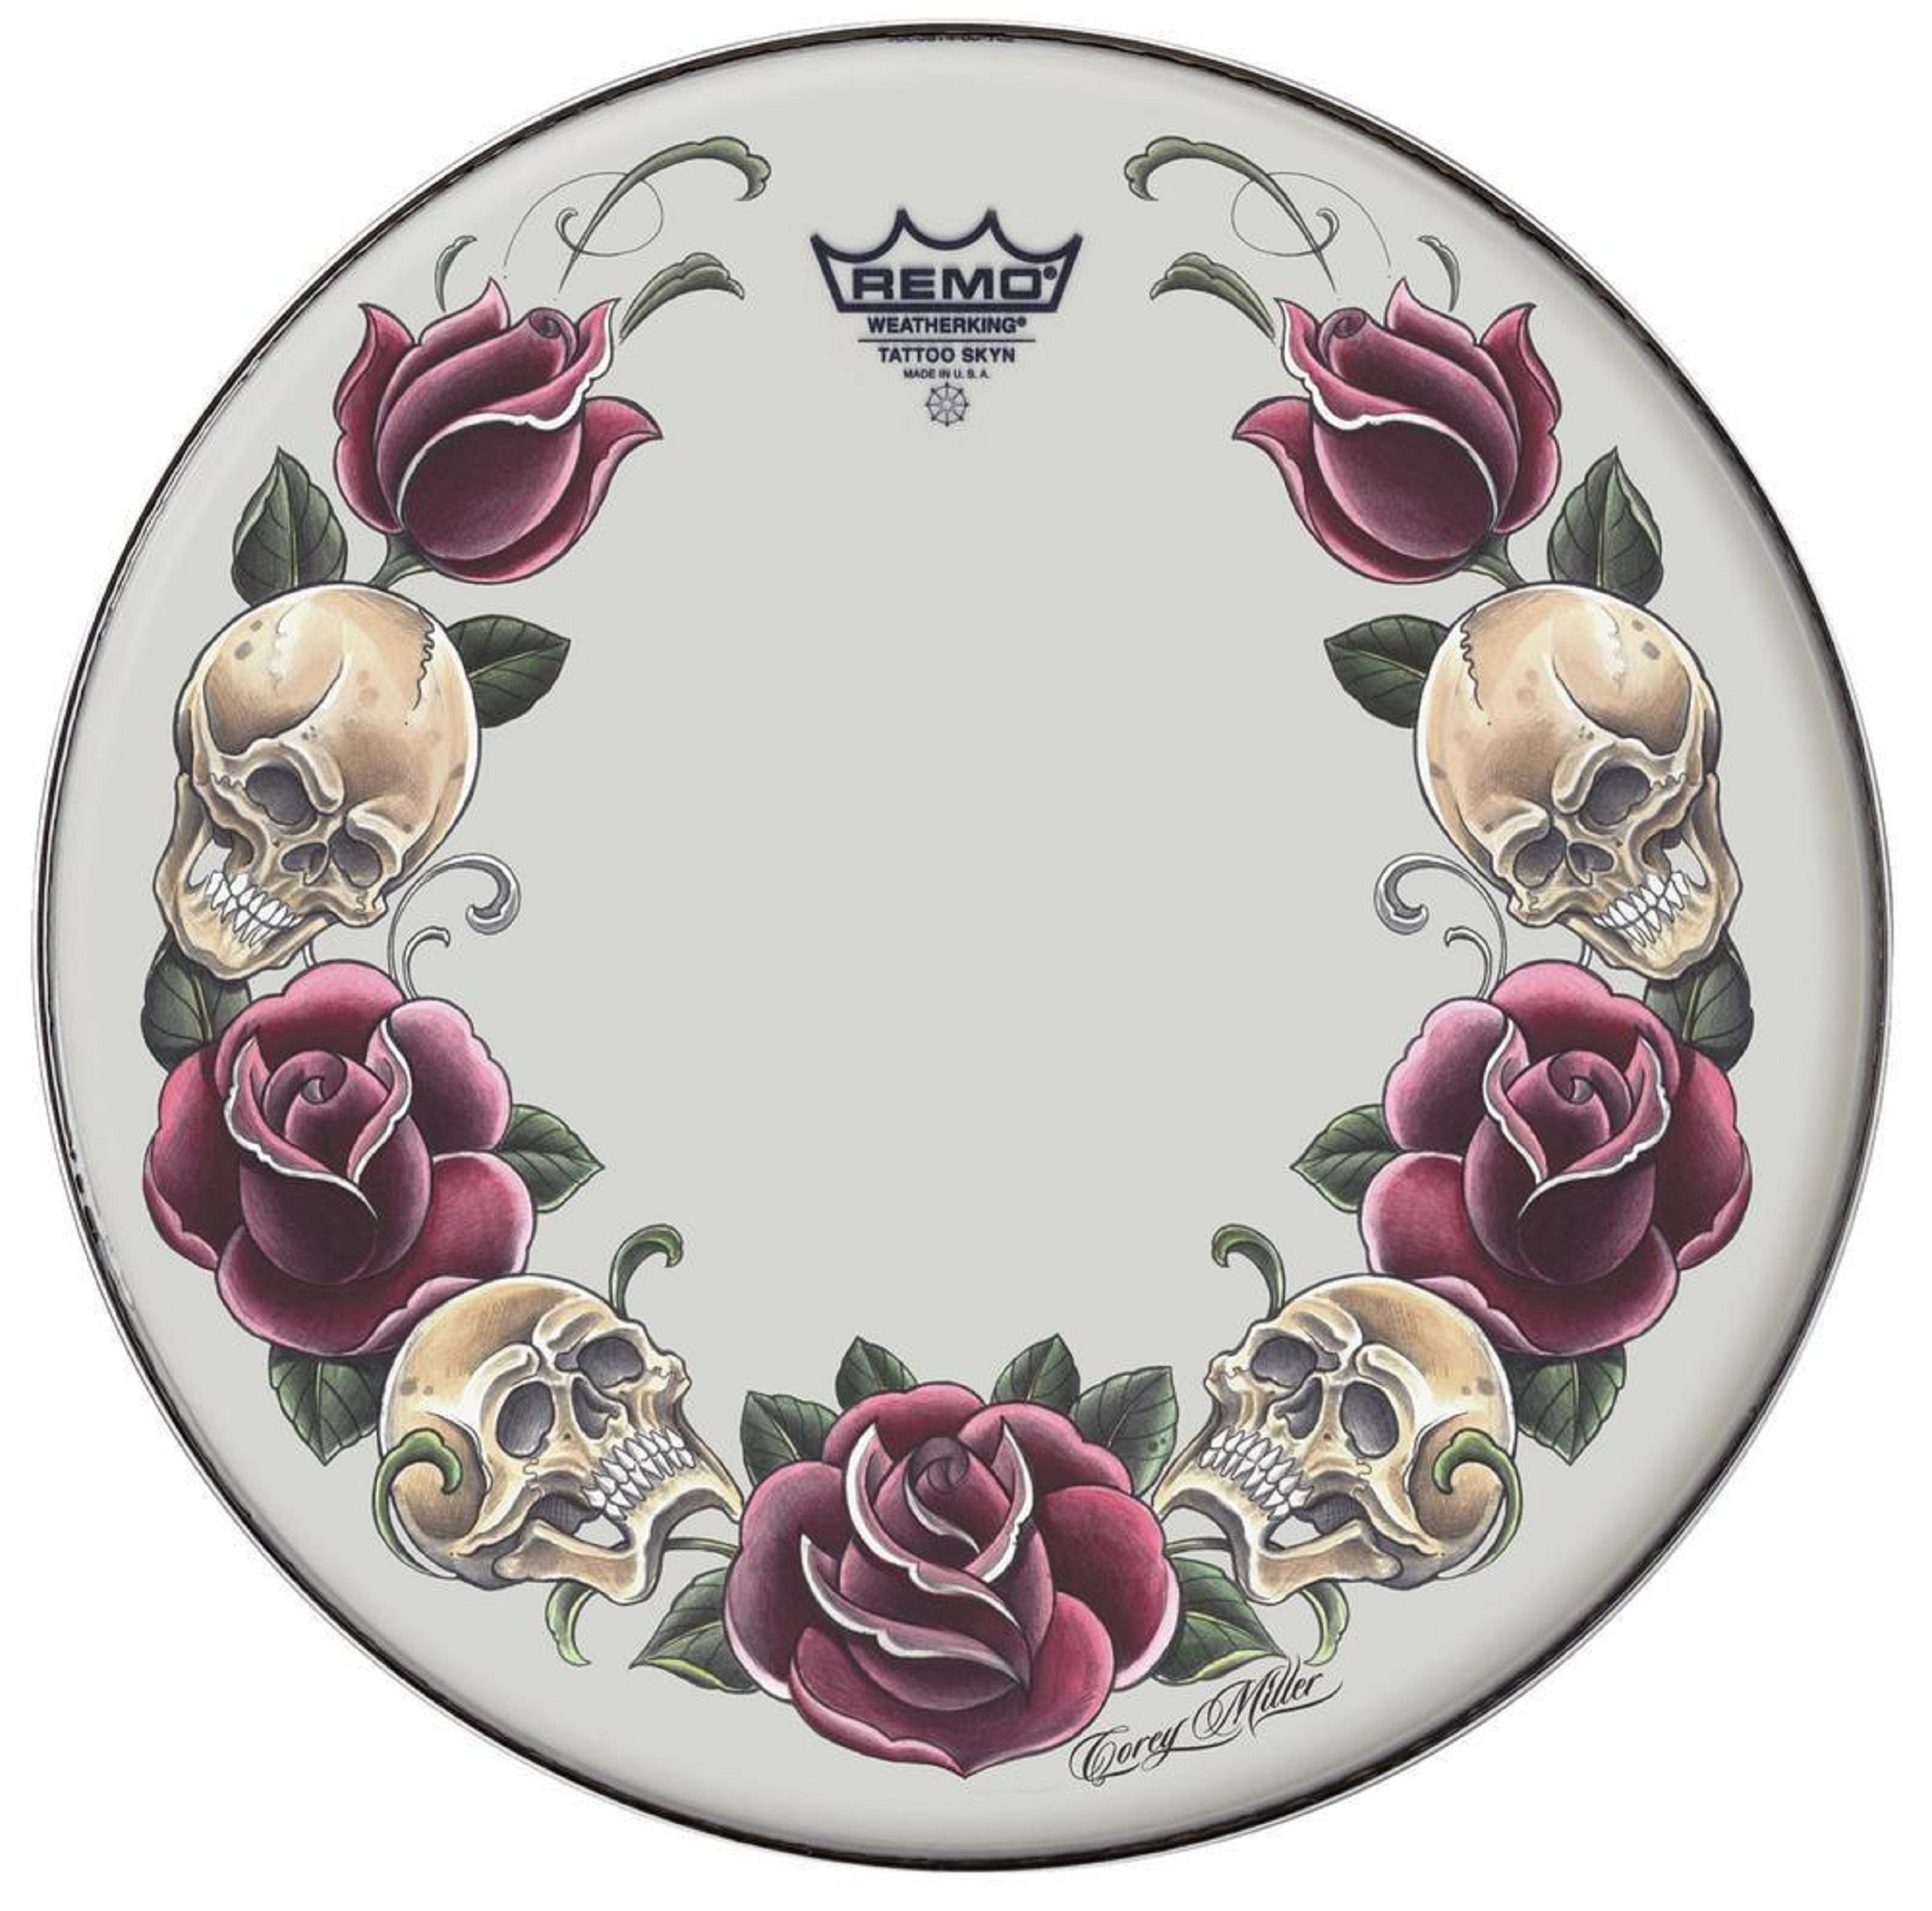 Remo Fell Tattoo Skyn Skyndeep 13" Rock and Roses